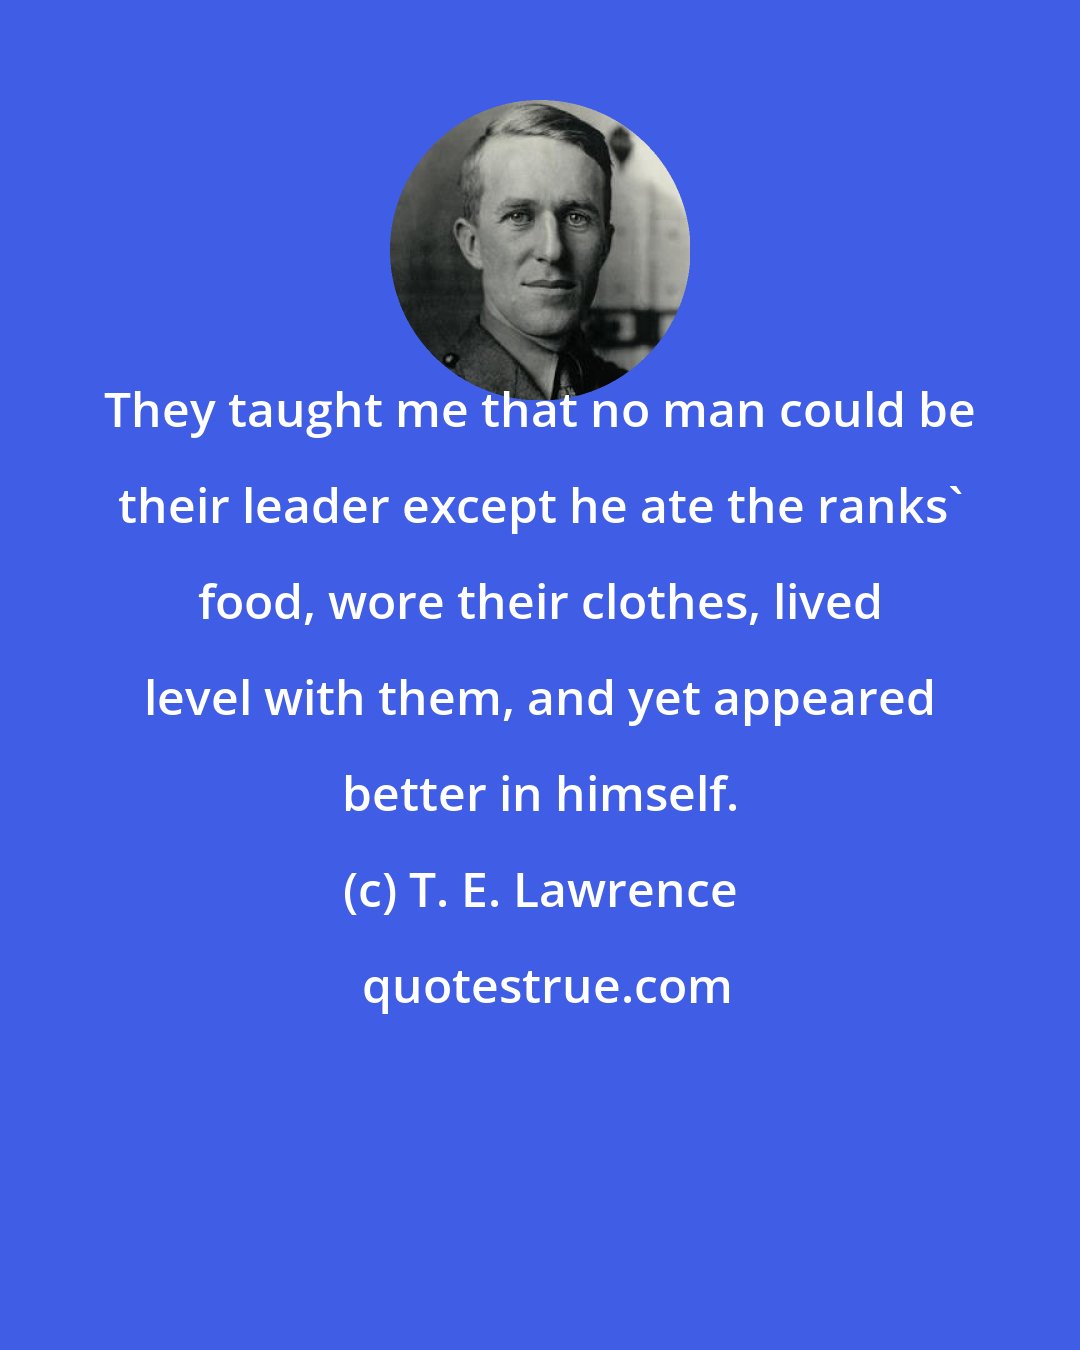 T. E. Lawrence: They taught me that no man could be their leader except he ate the ranks' food, wore their clothes, lived level with them, and yet appeared better in himself.